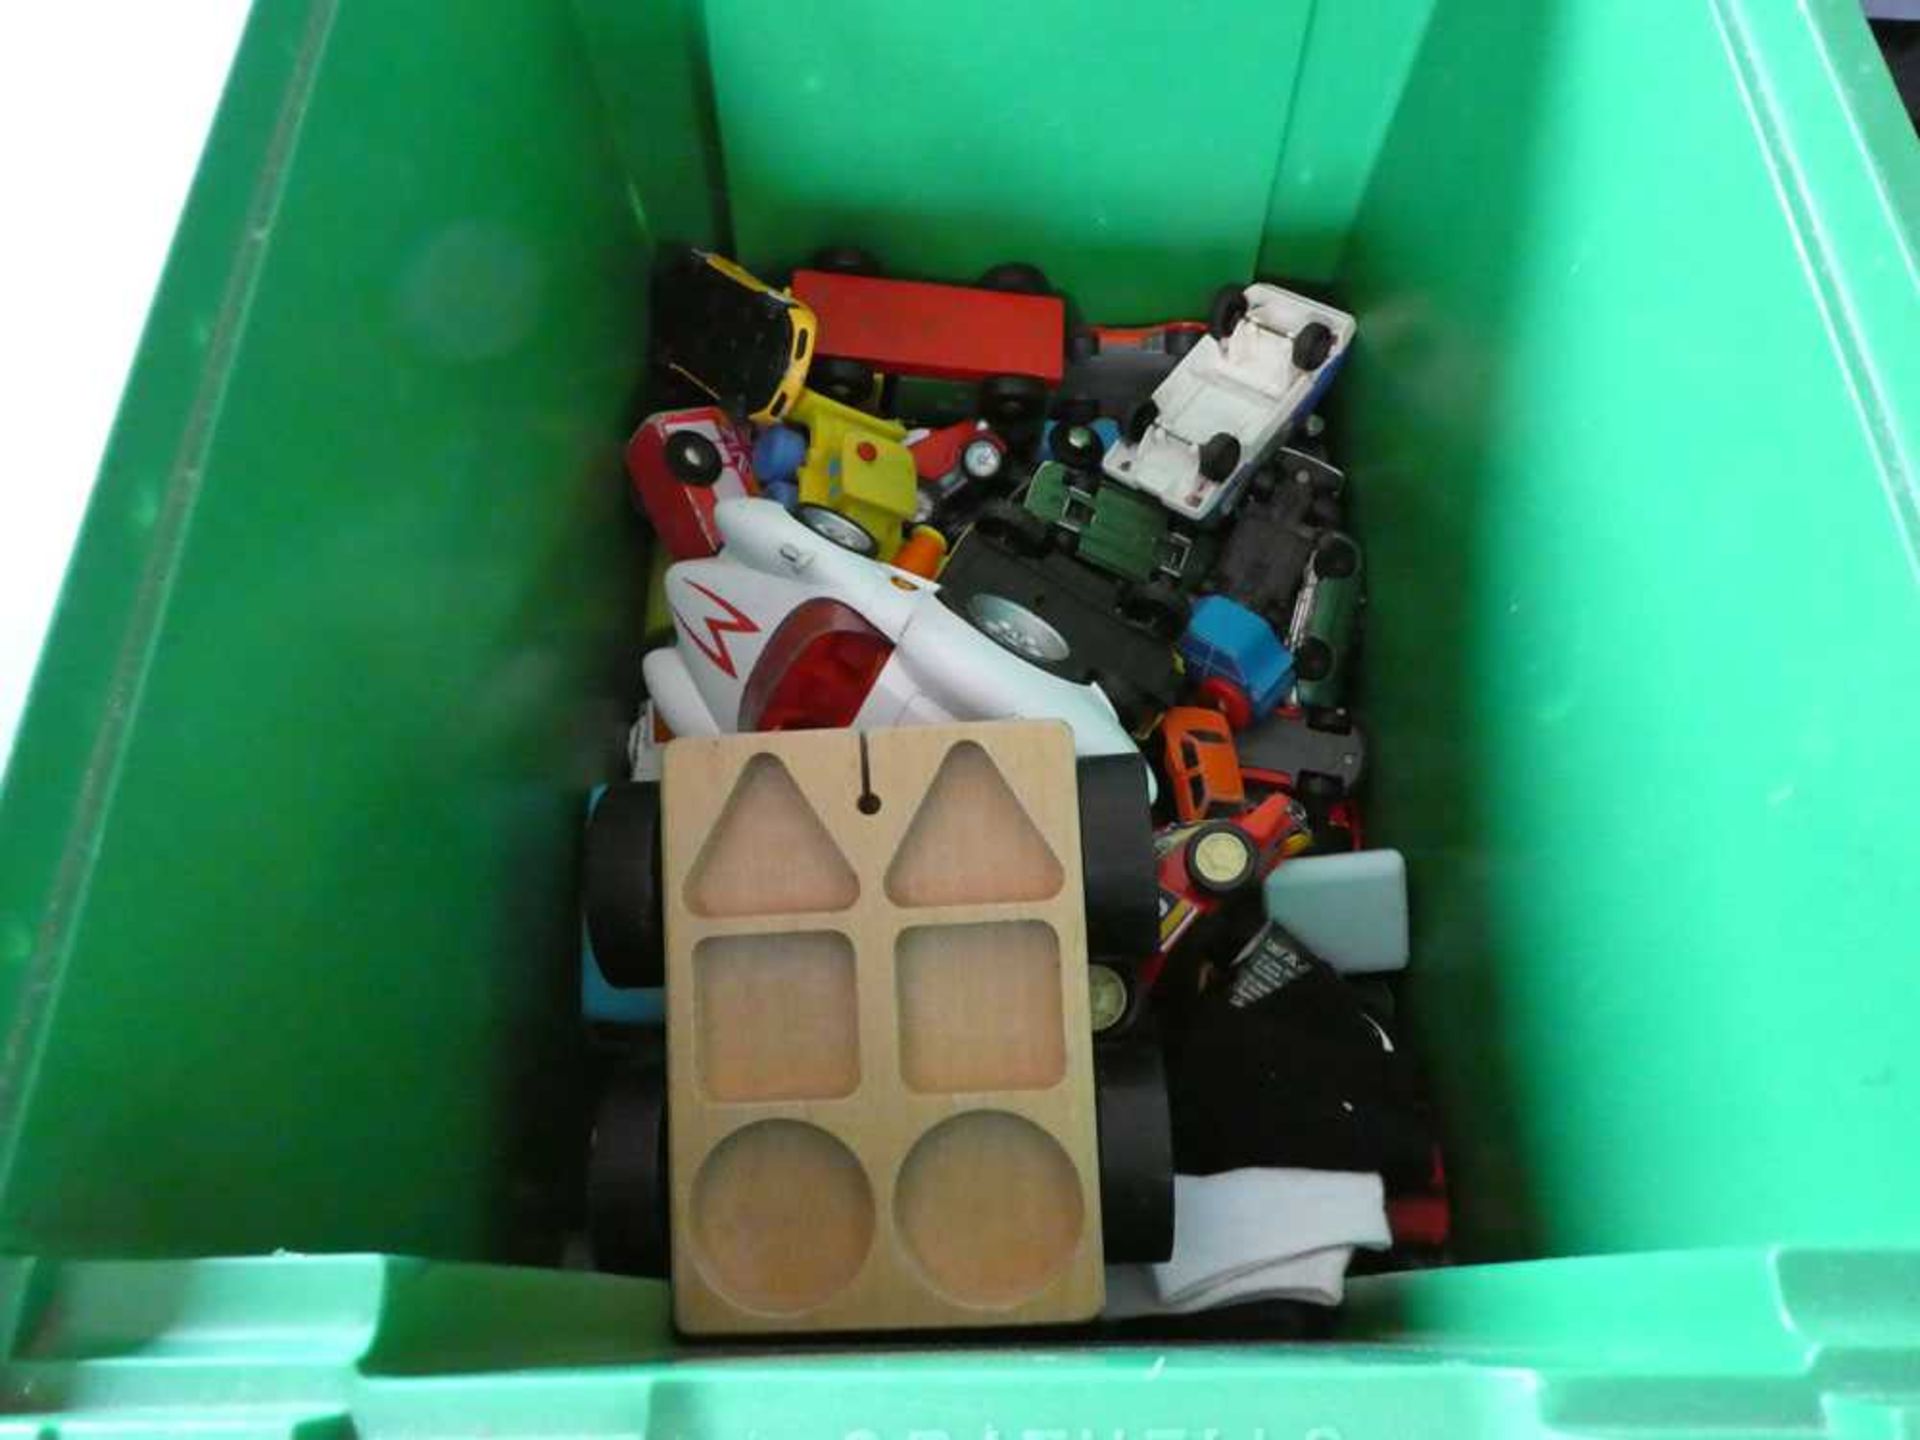 Crate of children's play worn Diecast and other toys